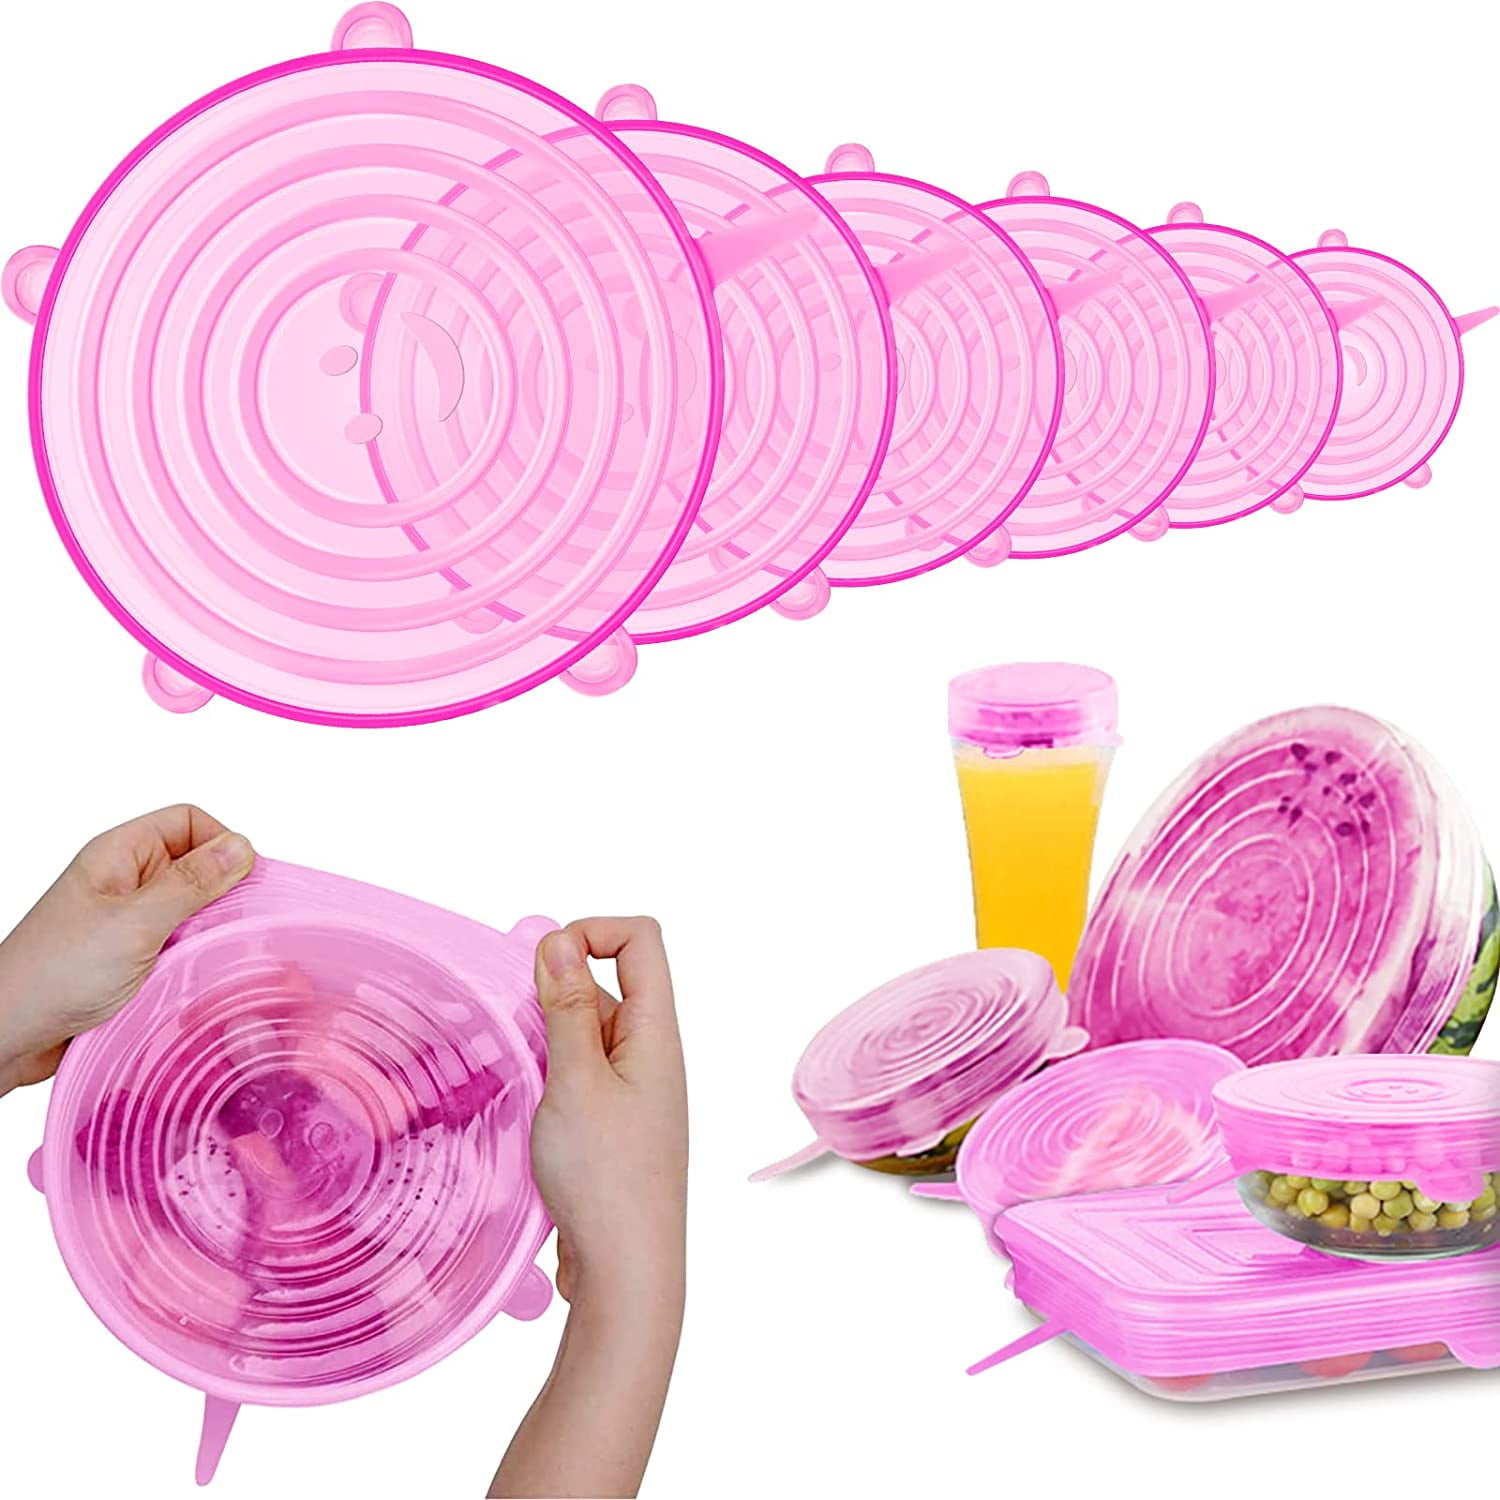 6 Reusable Silicone Lids - Stretch Covers for Fruit Vegetables